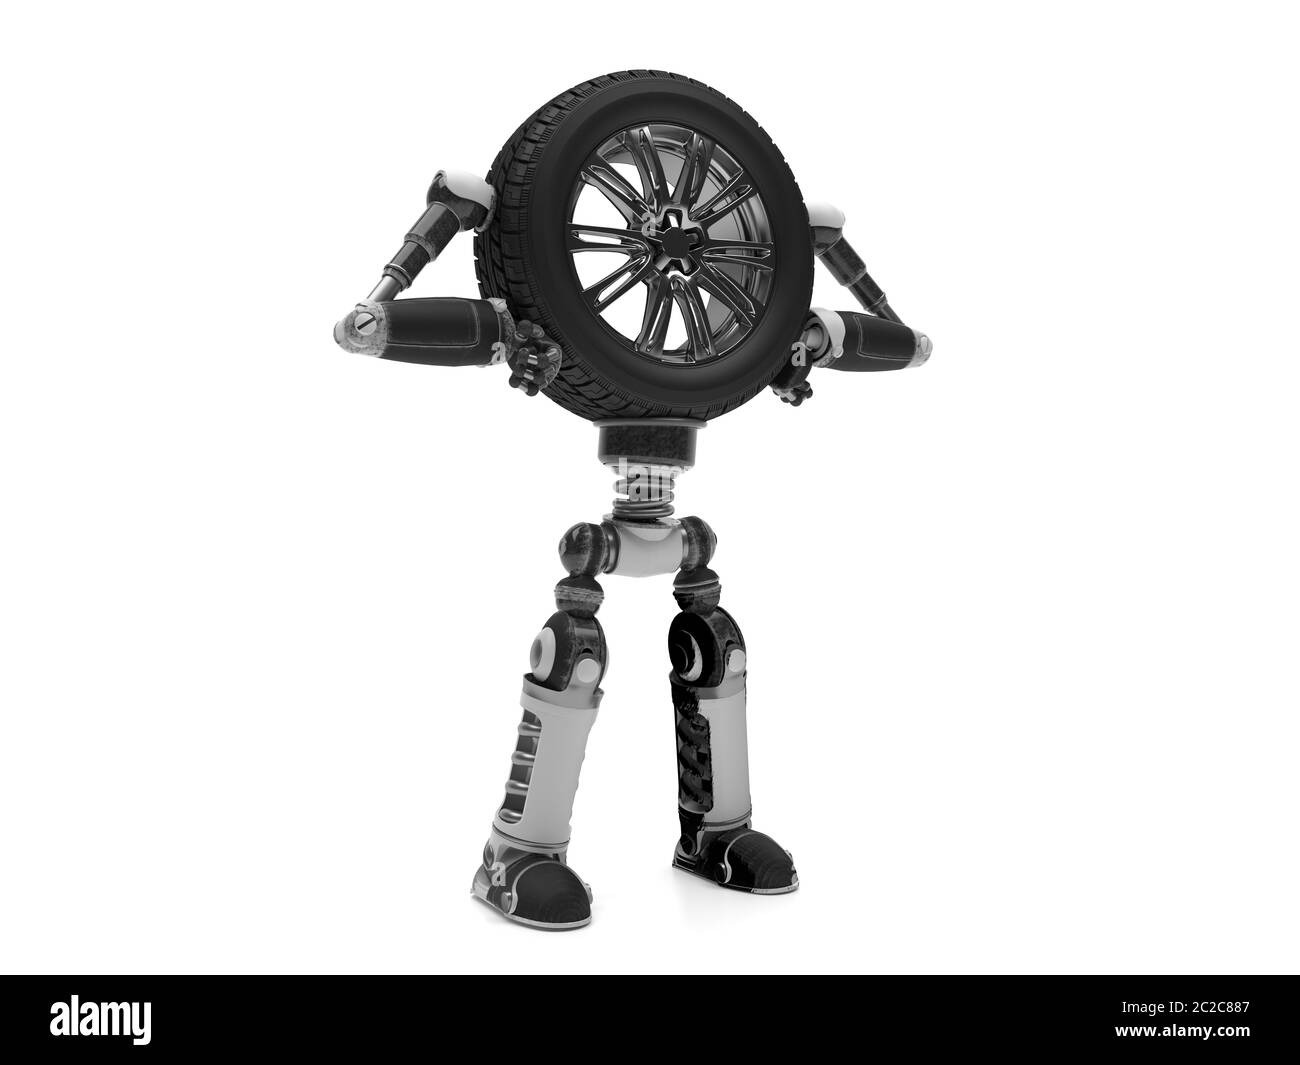 A robot with iron arms, legs and a car wheel instead of a head is isolated on a white background. Mock up for advertising car service or auto maintena Stock Photo